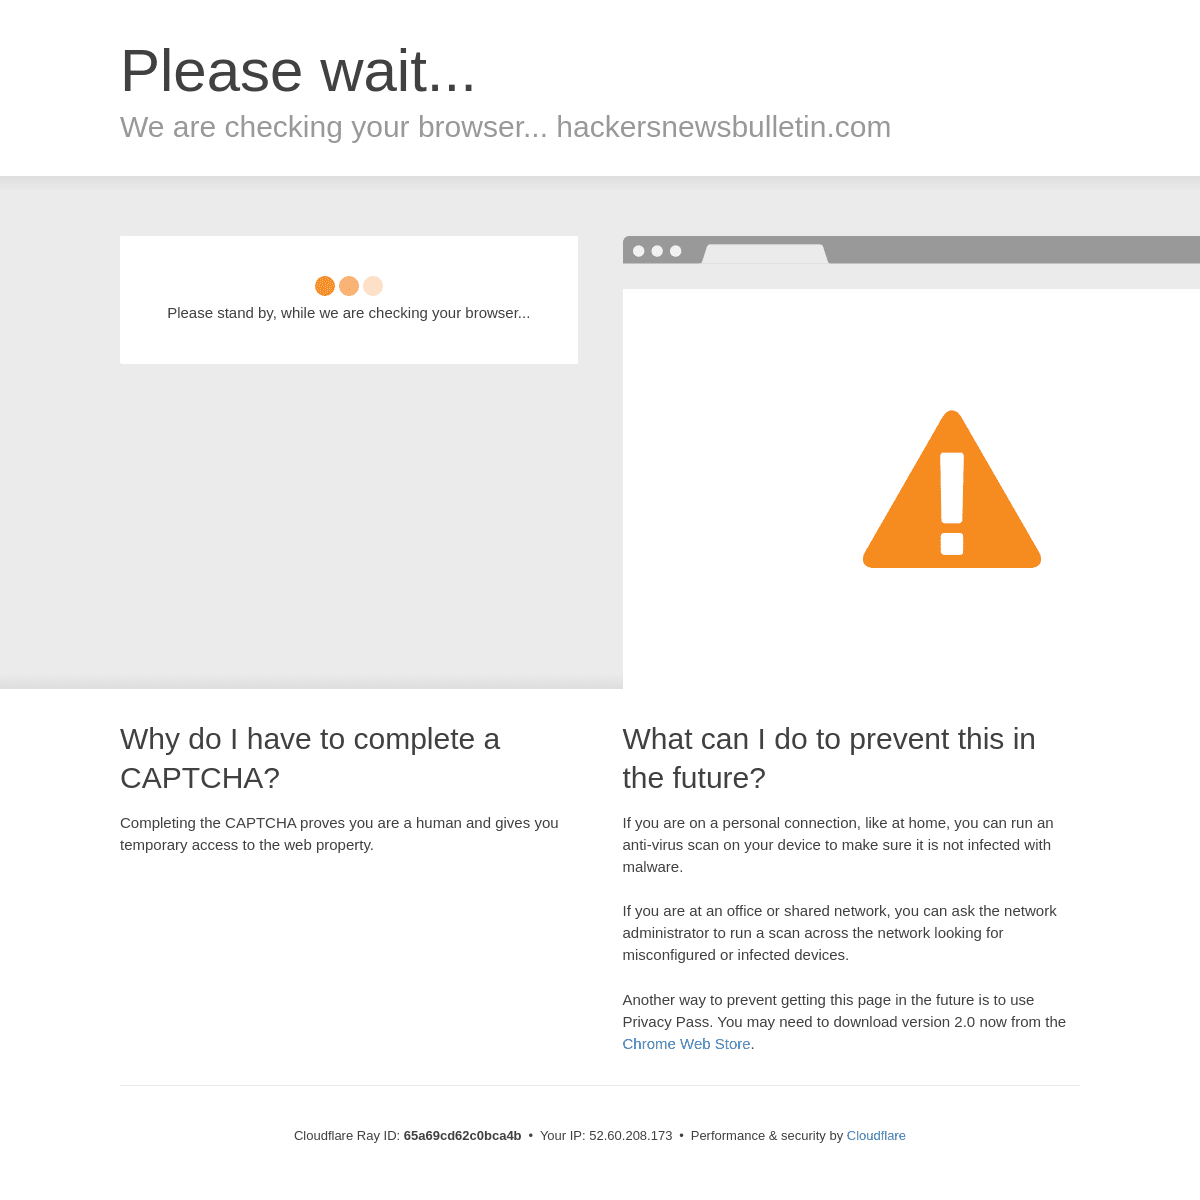 A complete backup of https://hackersnewsbulletin.com